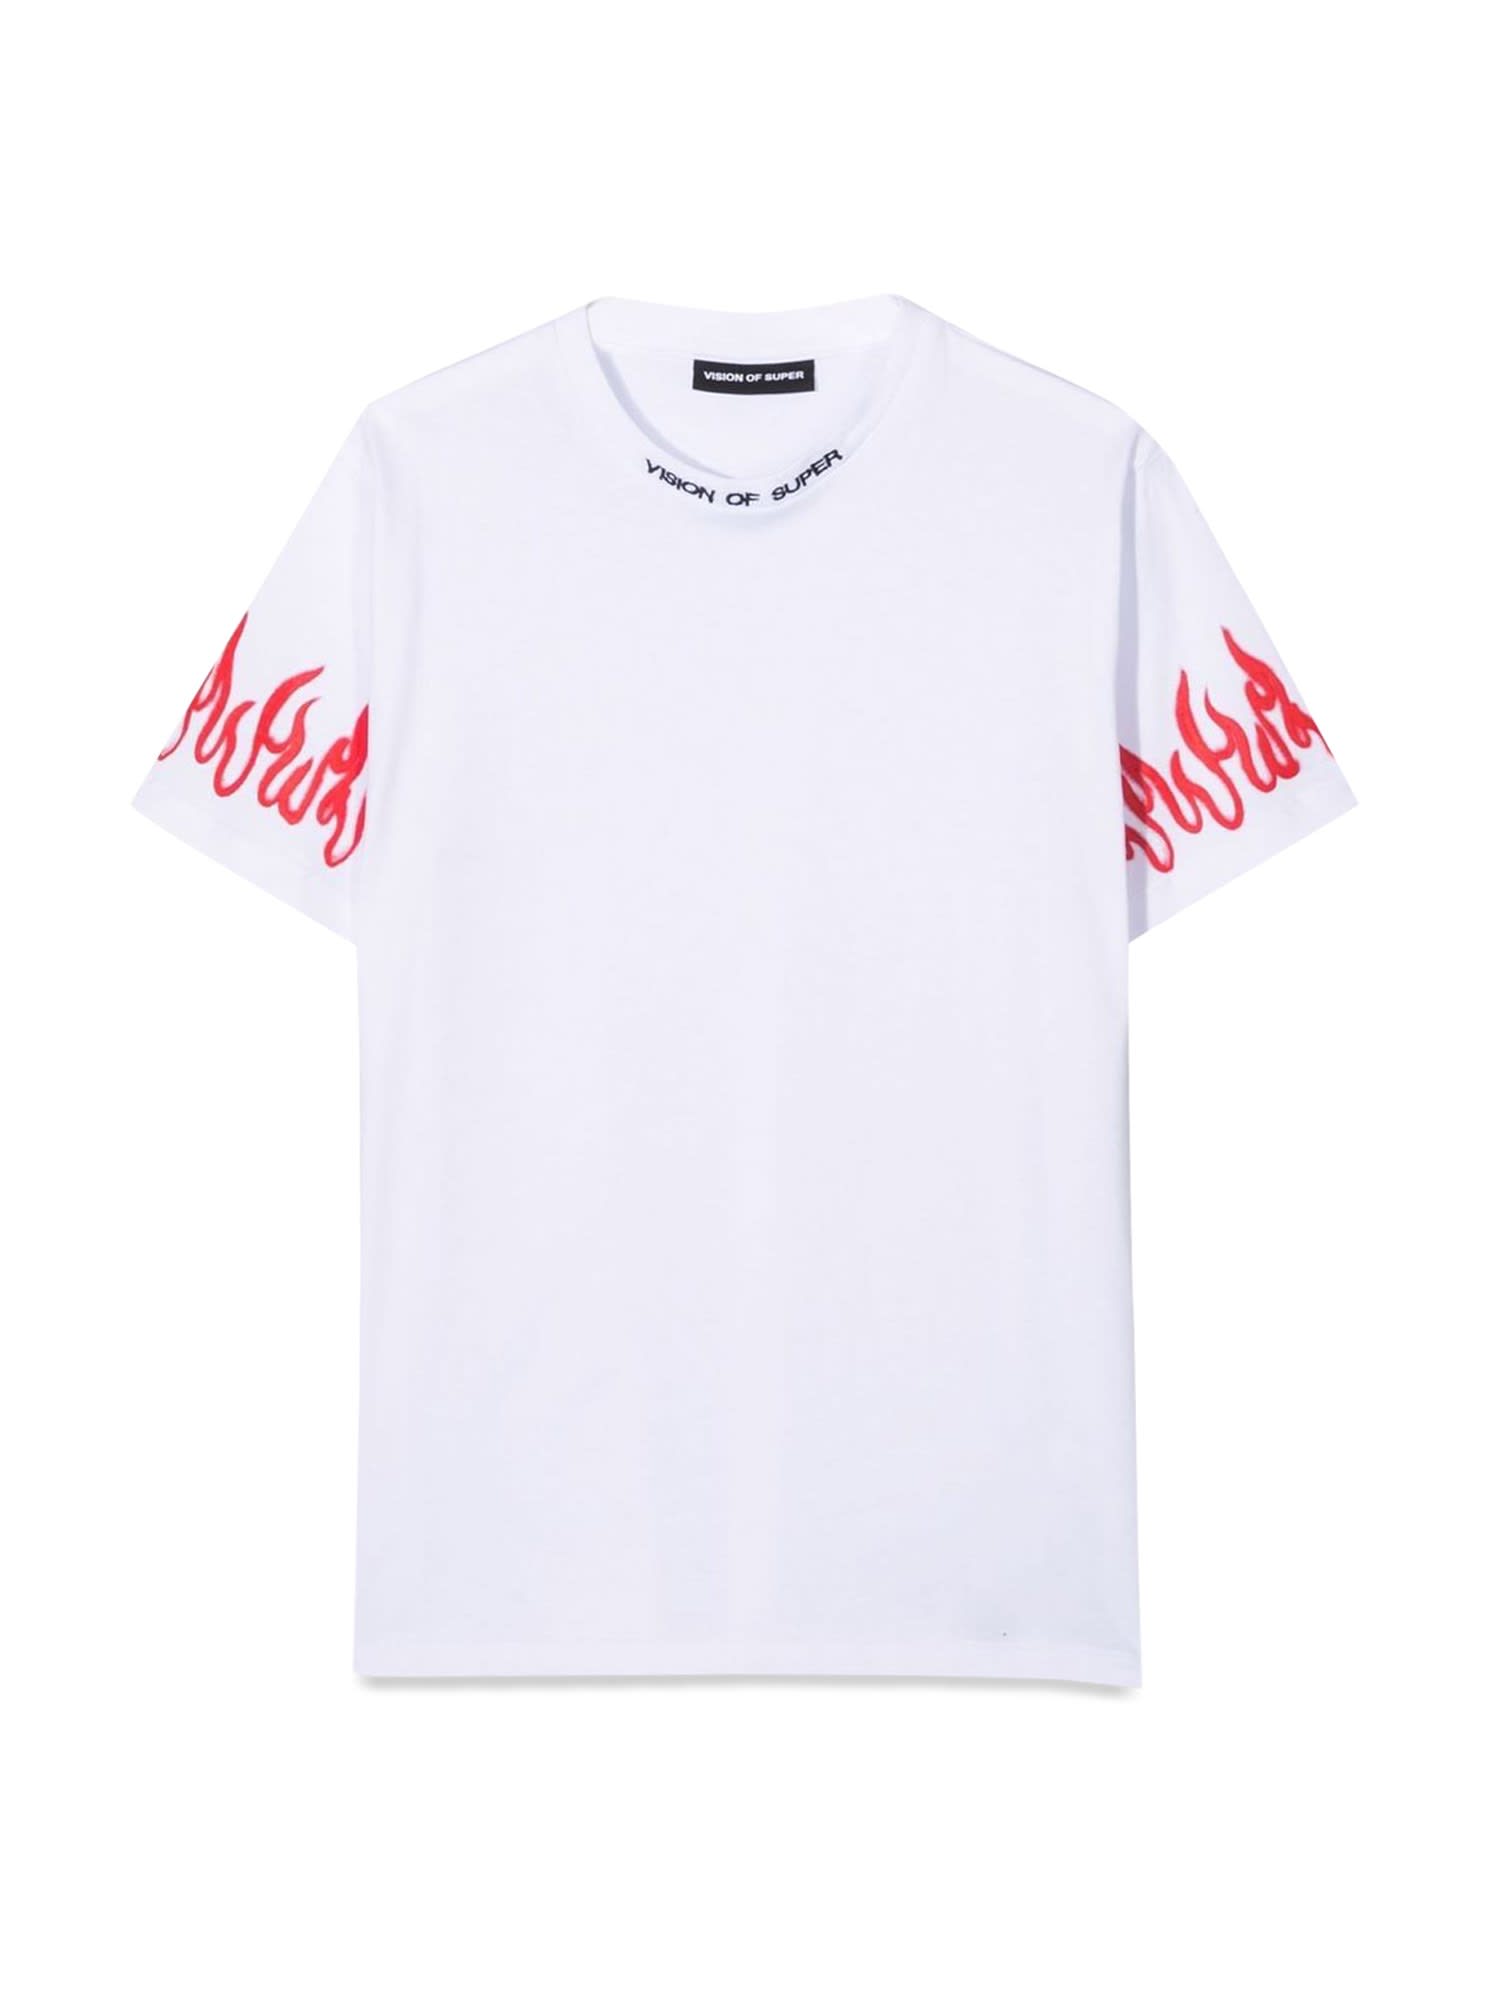 Vision of Super White Kids T-shirt With Red Spray Flames